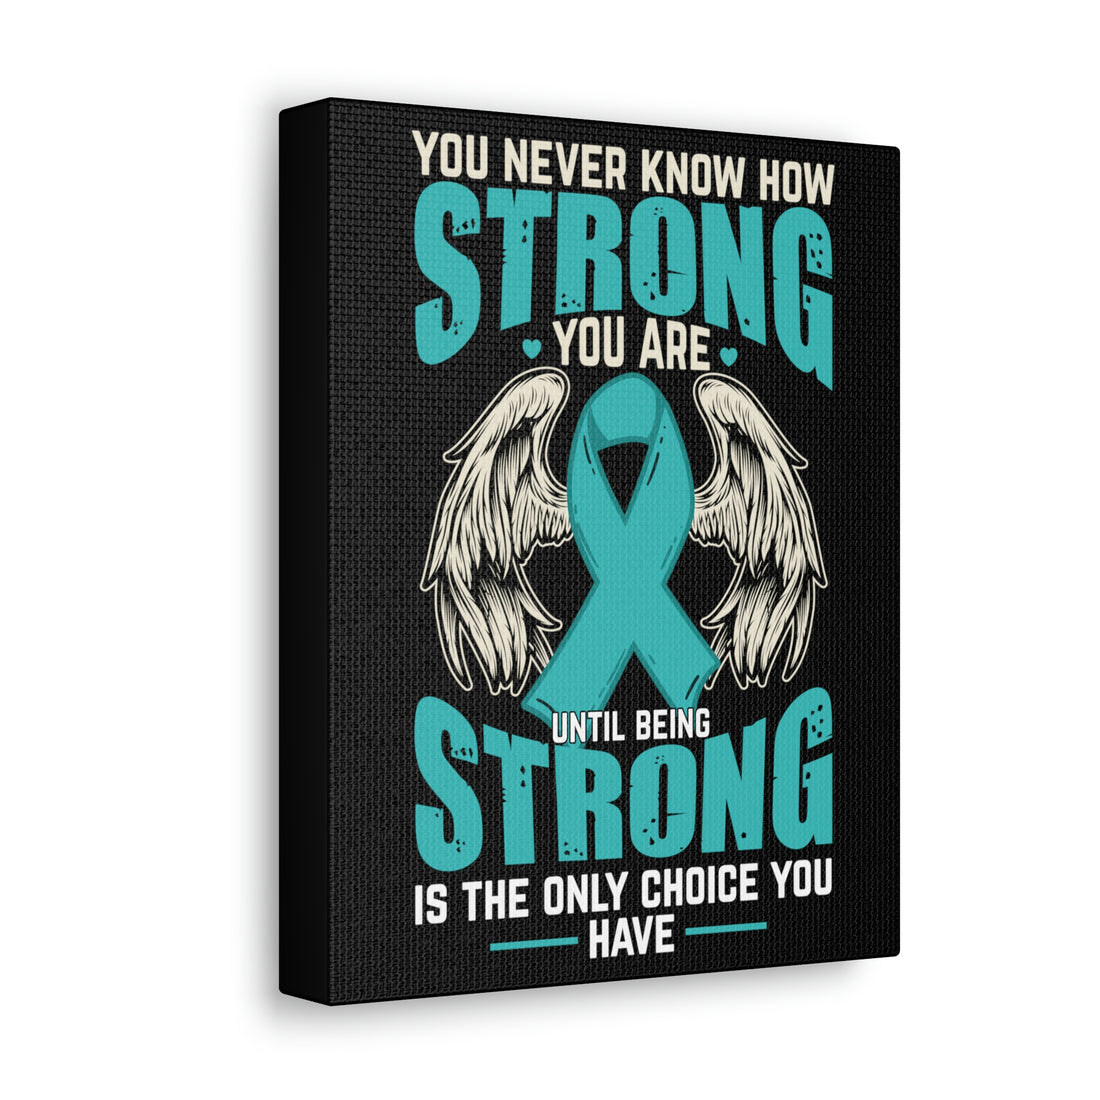 You Never Know How Strong You Are - Canvas Print